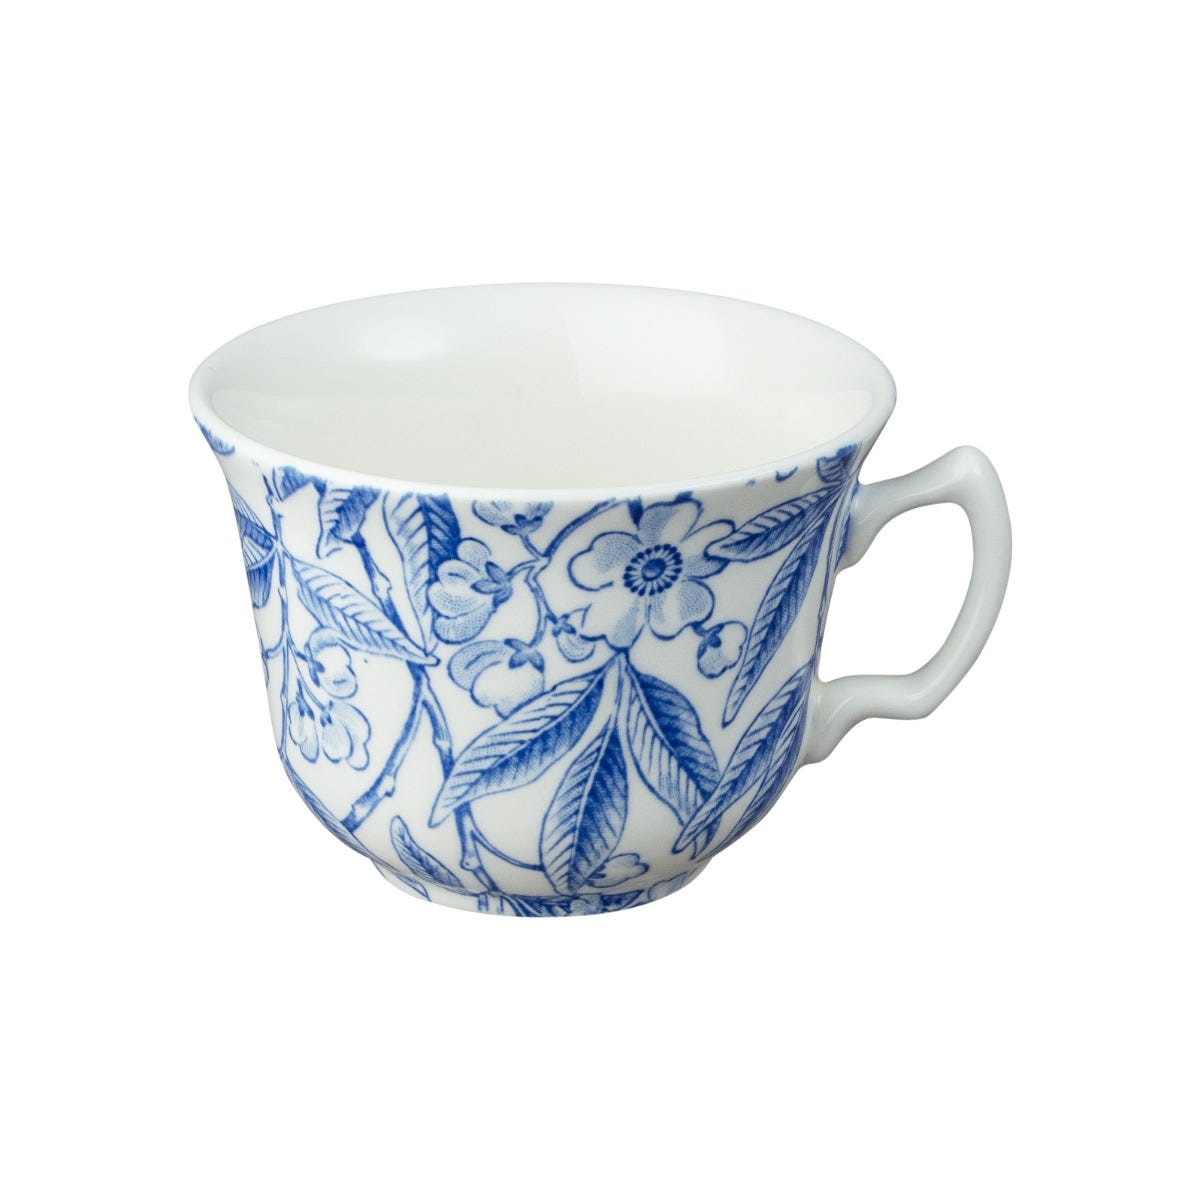 Prunus Cup and Saucer in Blue, Burleigh